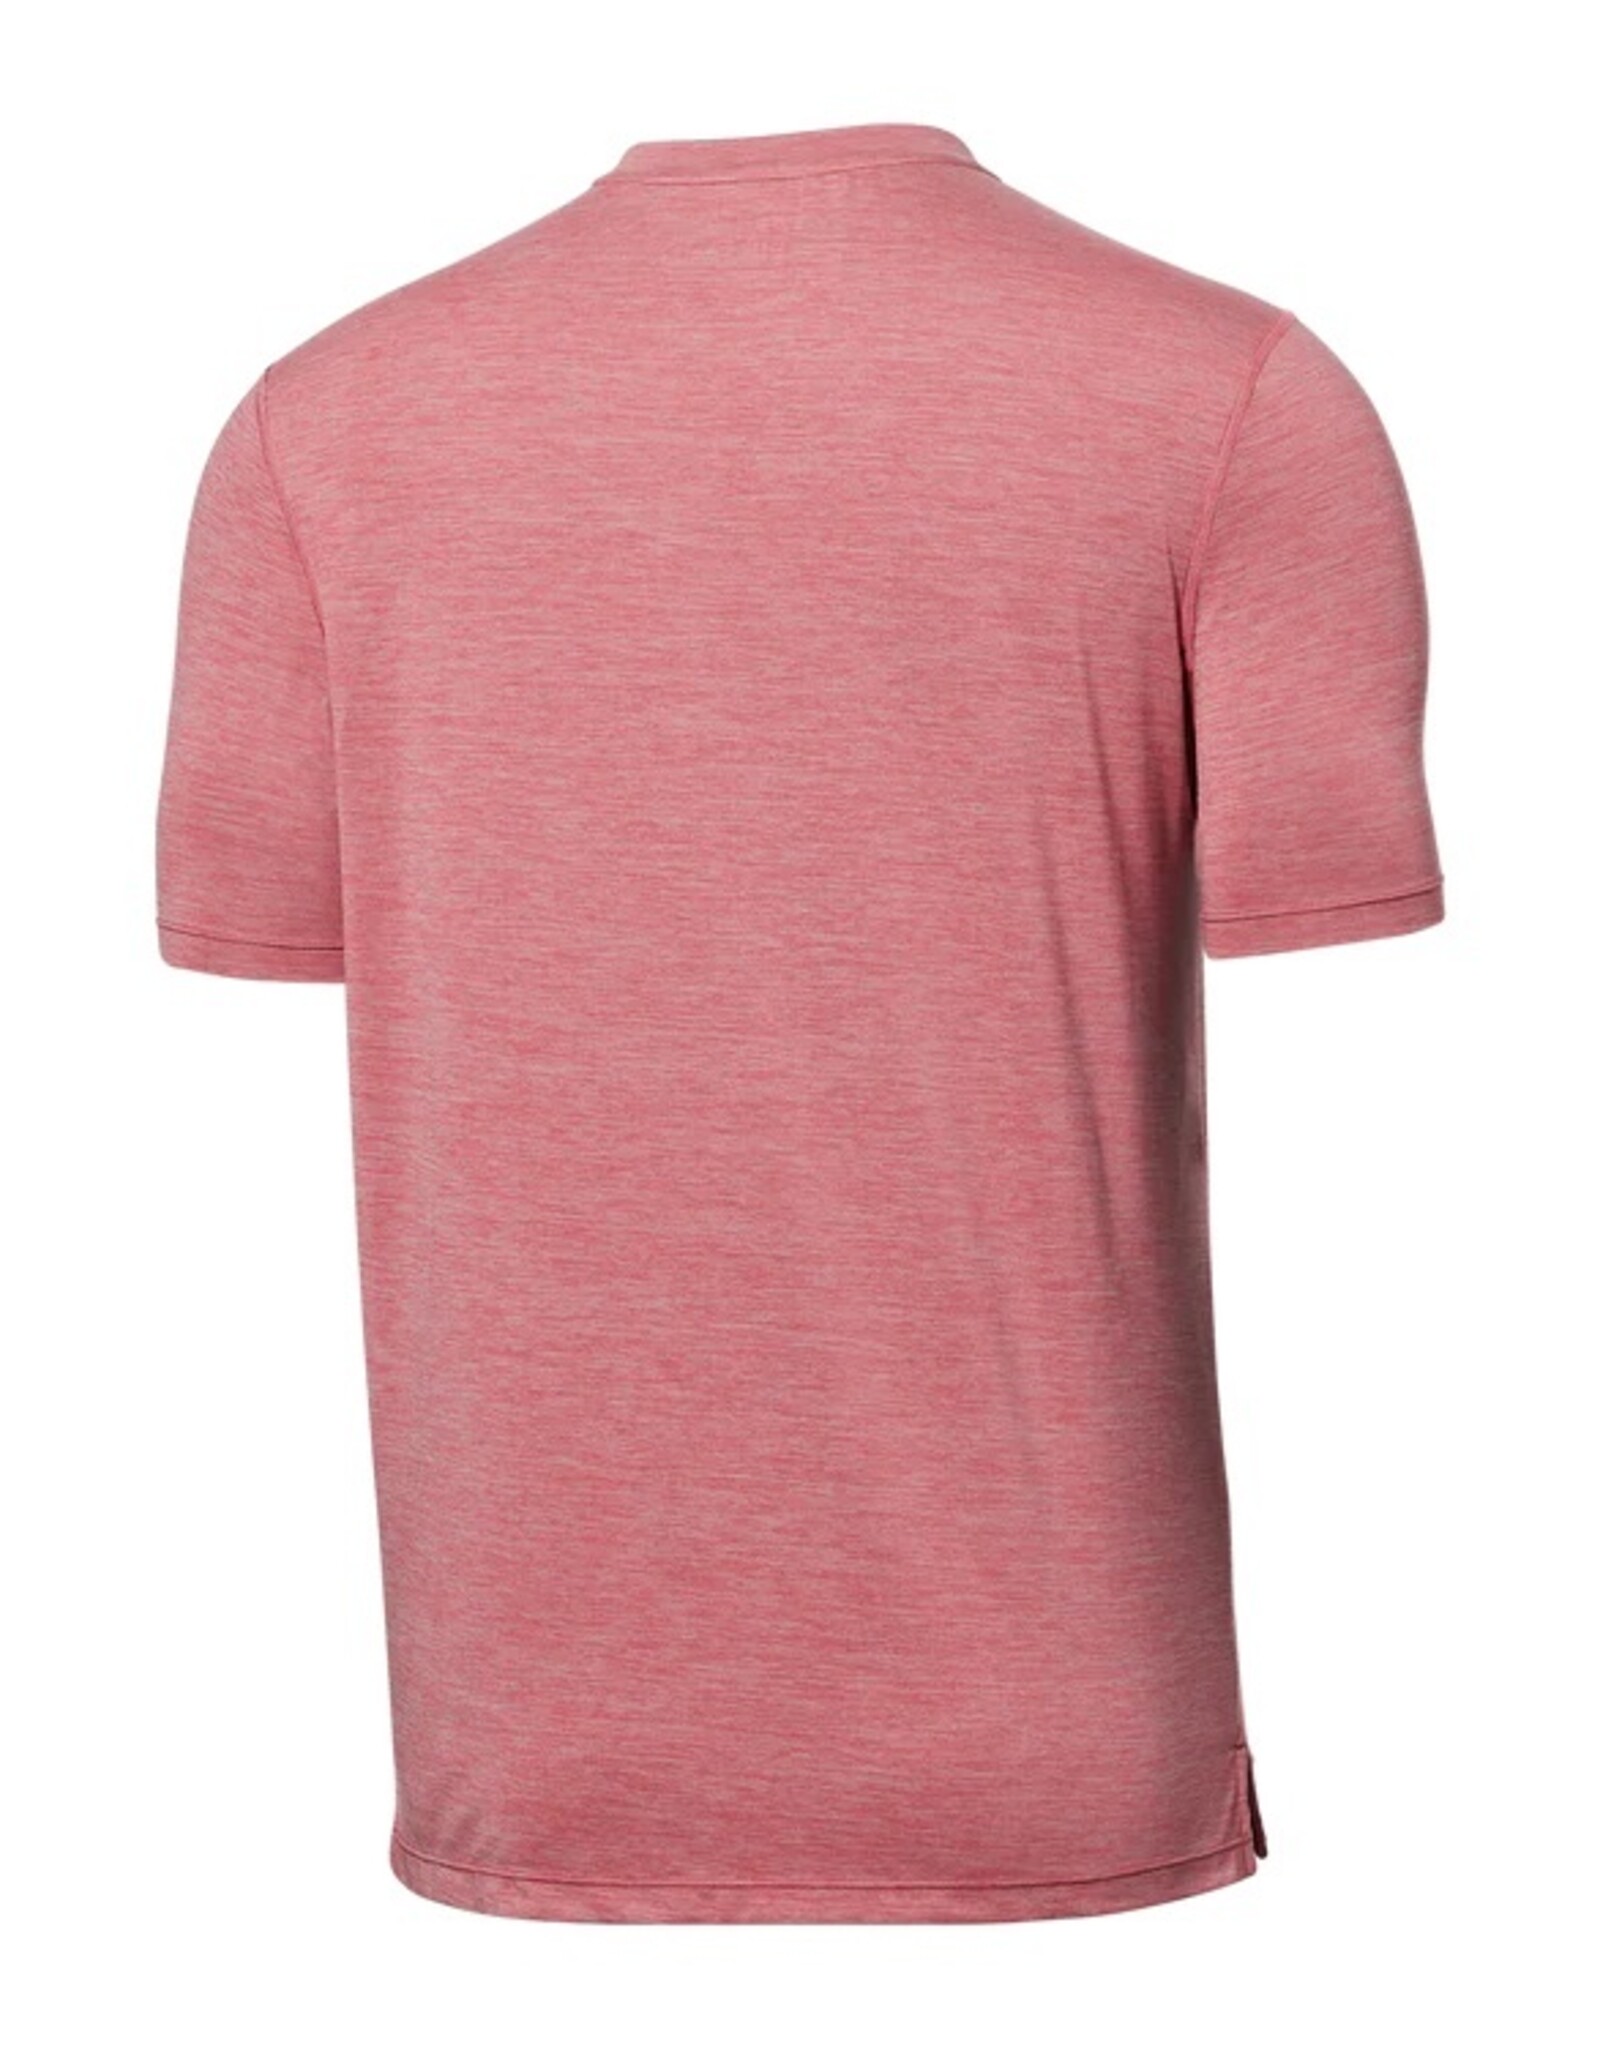 Saxx DropTemp All Day Cooling Pocket Tee